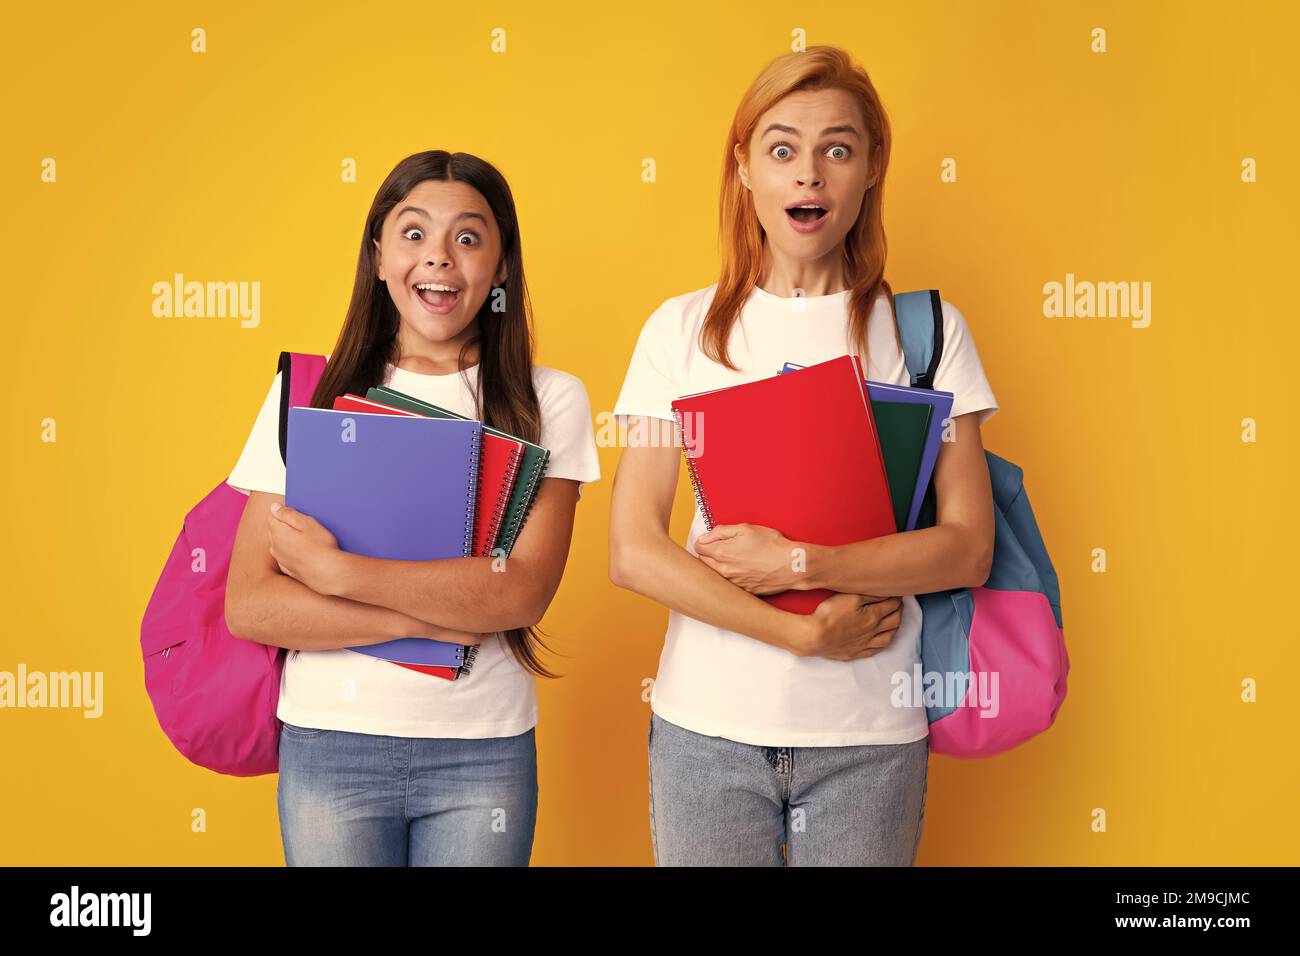 Portrait of expressive emotional teen girls. School, learning and education concept. Mother and daughter schoolgirls with school backpack and books Stock Photo